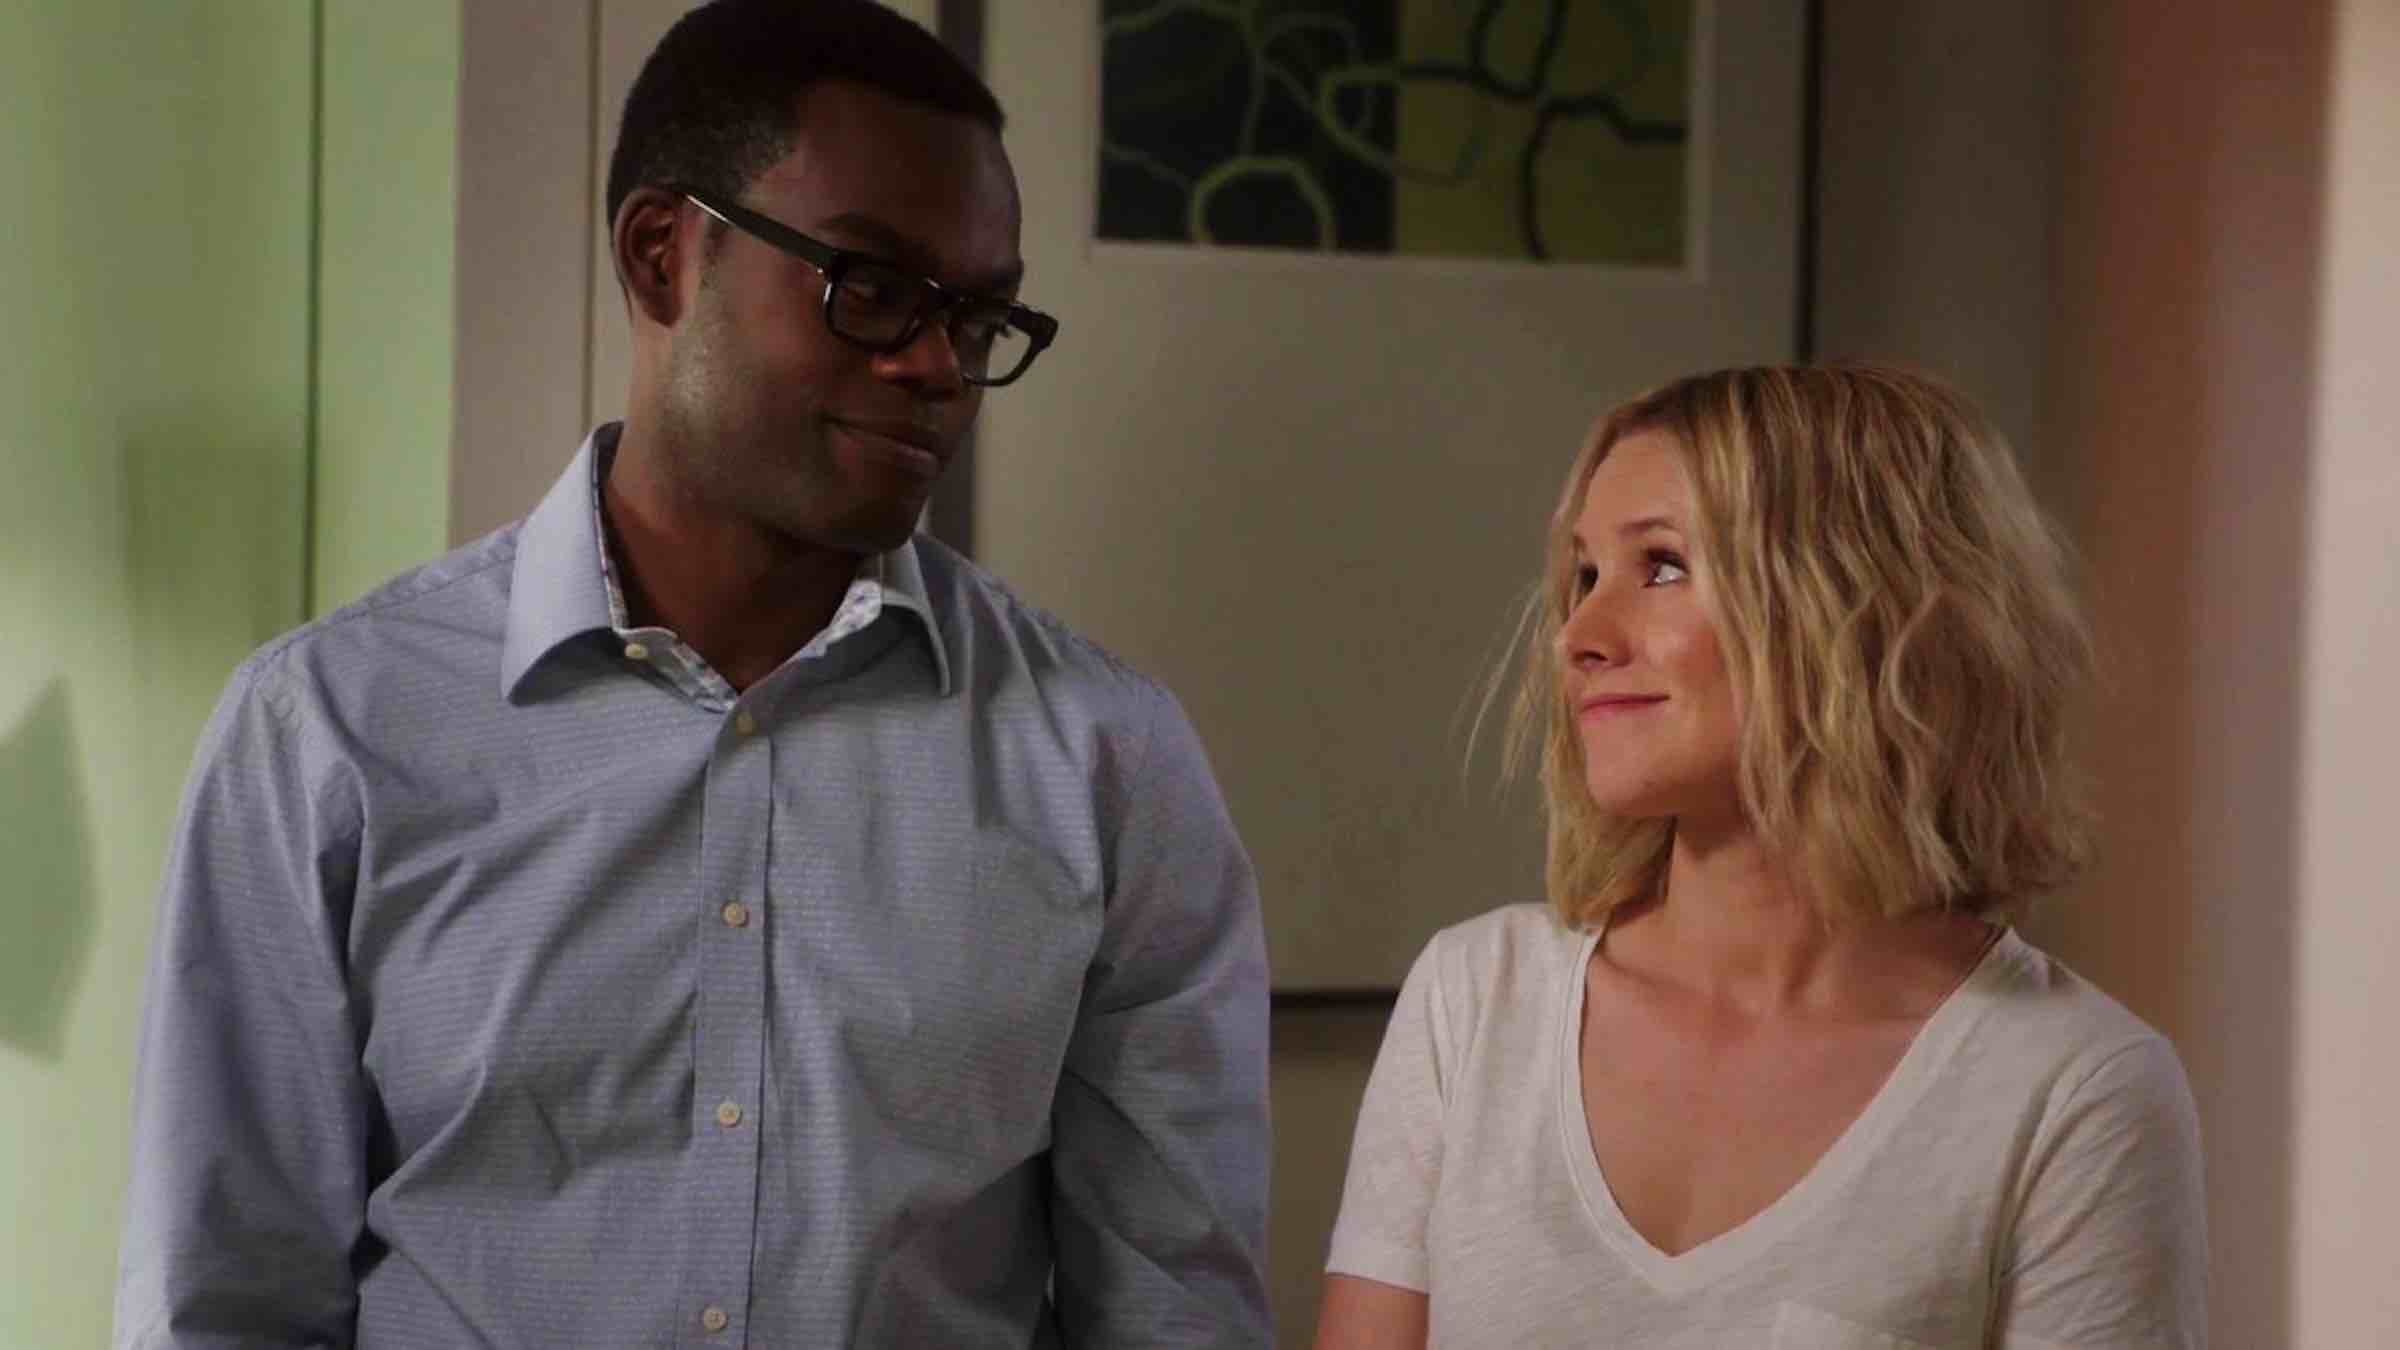 Eleanor and Chidi, characters from The Good Place, looking at each-other with tender and a soft smile.